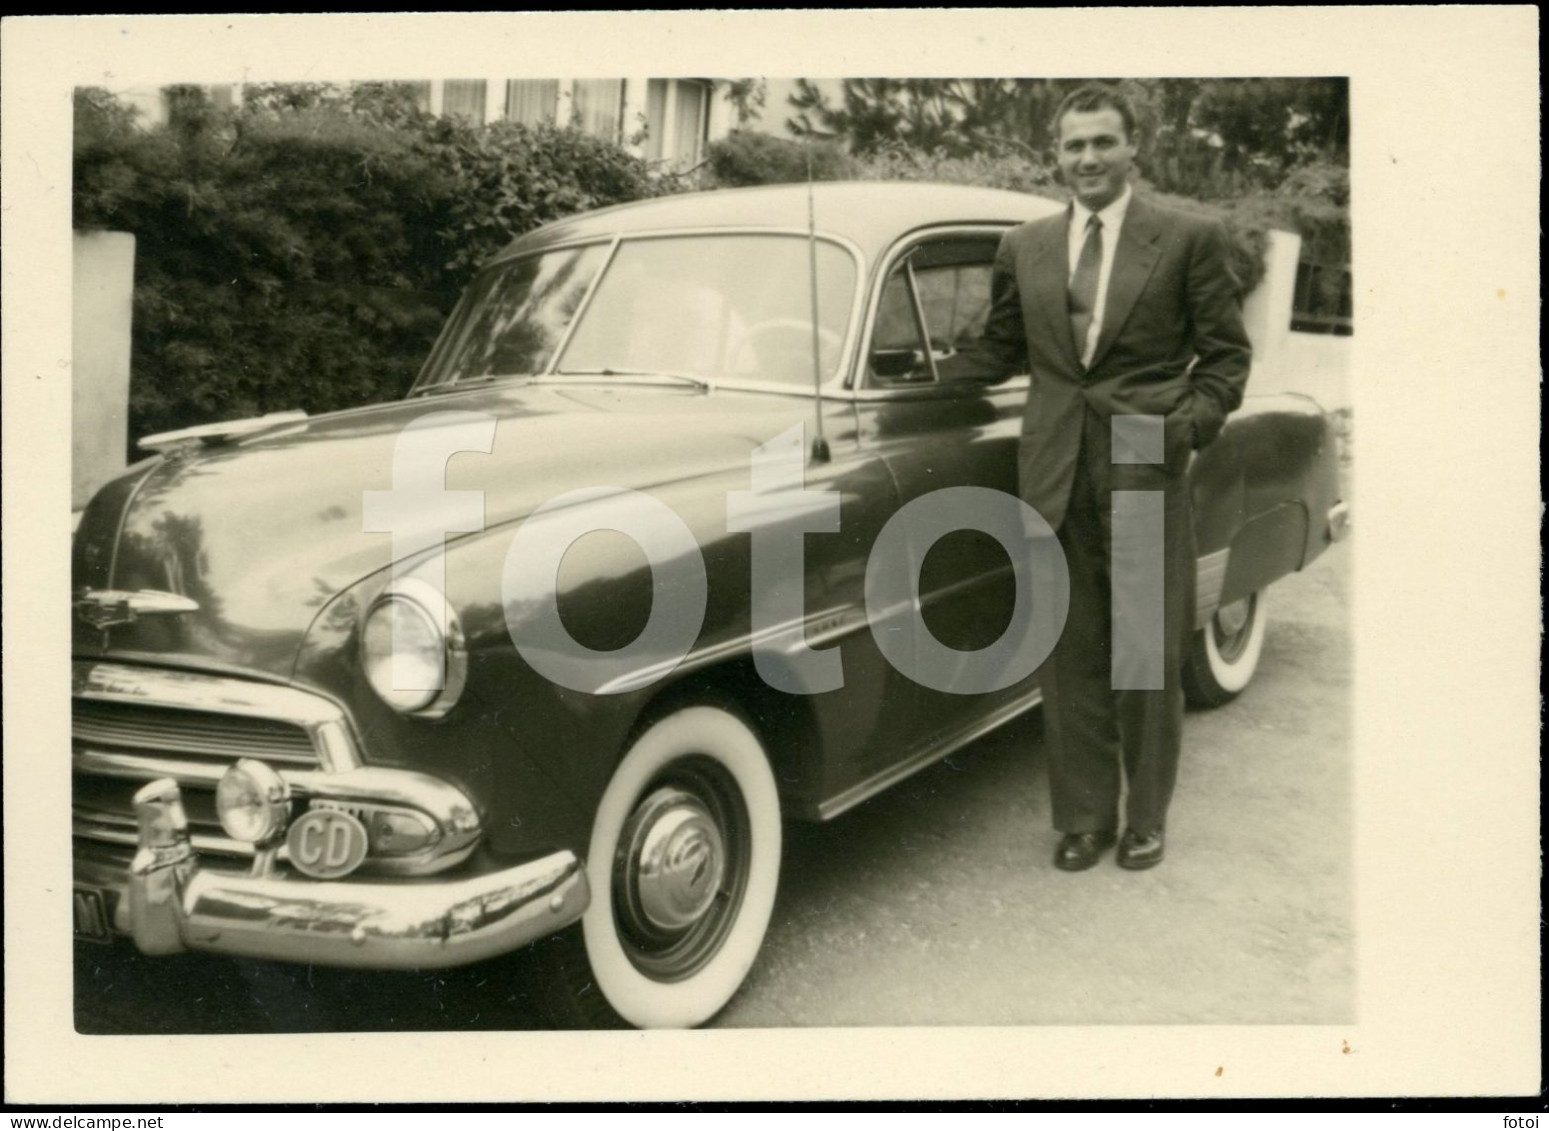 50s REAL PHOTO FOTO CHEVROLET CHEVY CAR DIPLOMATIC CORP AZORES AÇORES PORTUGAL AT8 - Automobiles